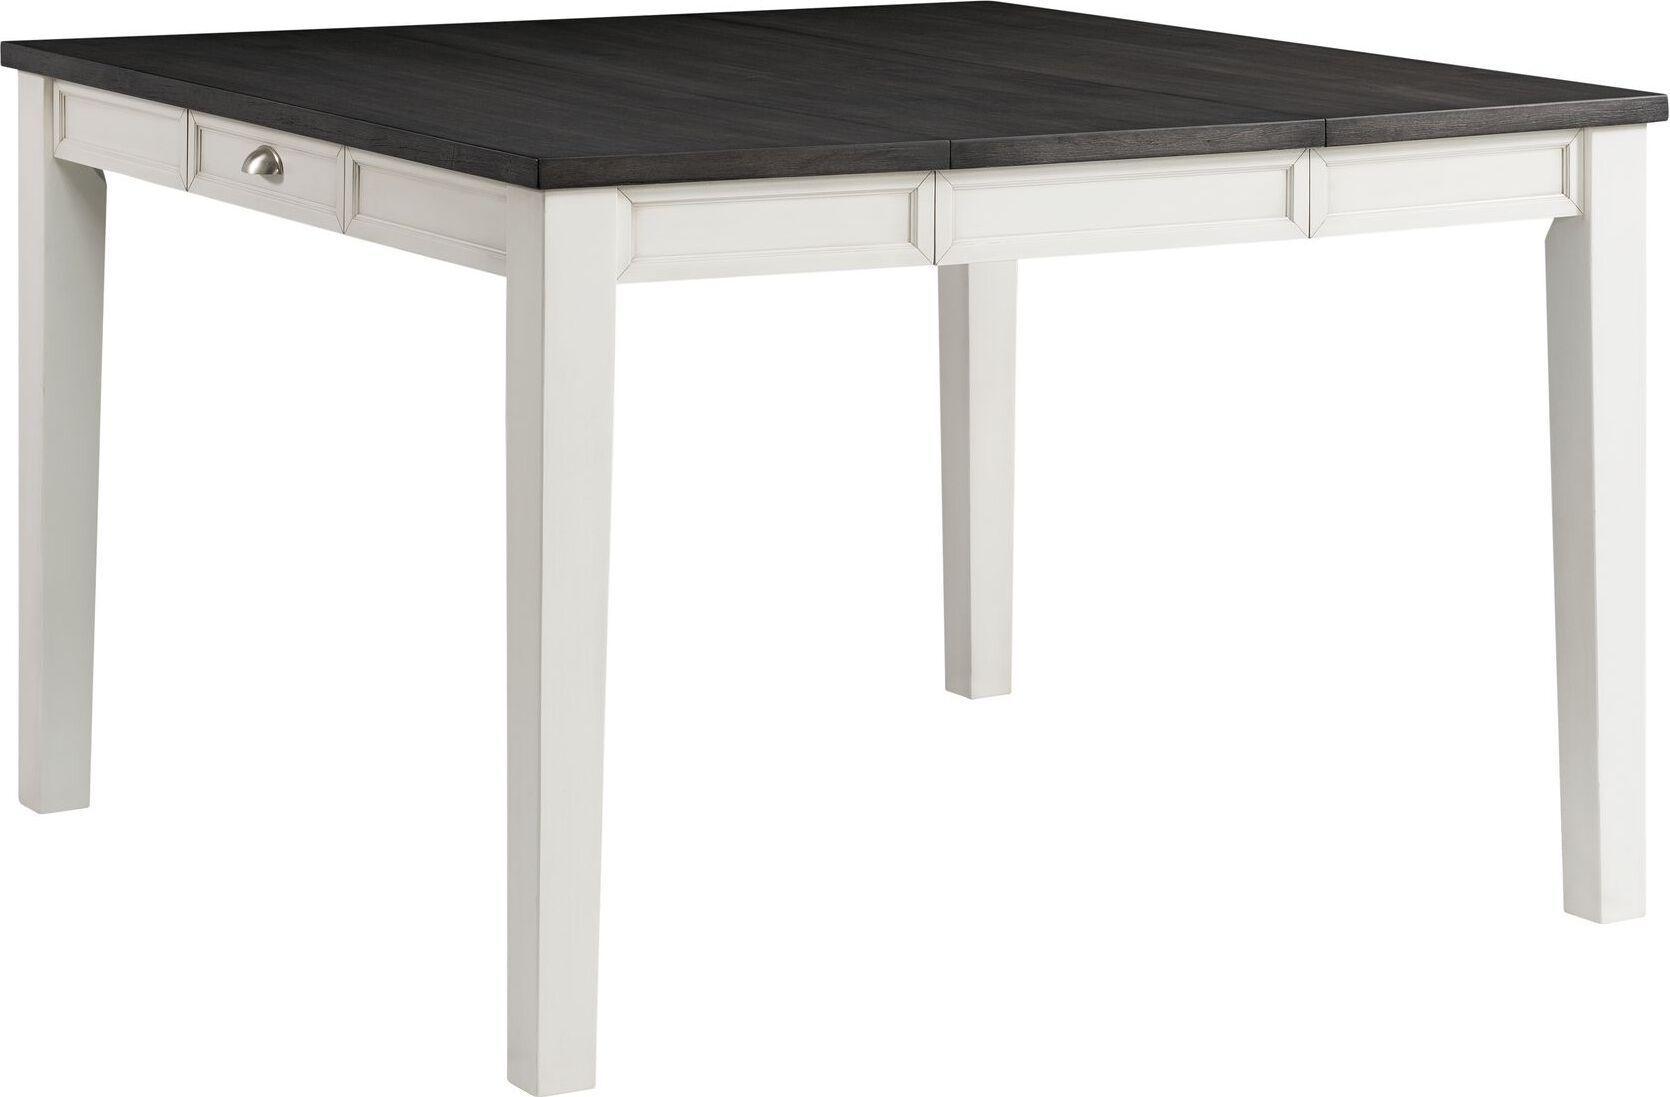 Elements Bar Tables - Jamison Two Tone Counter Height Dining Table with Storage